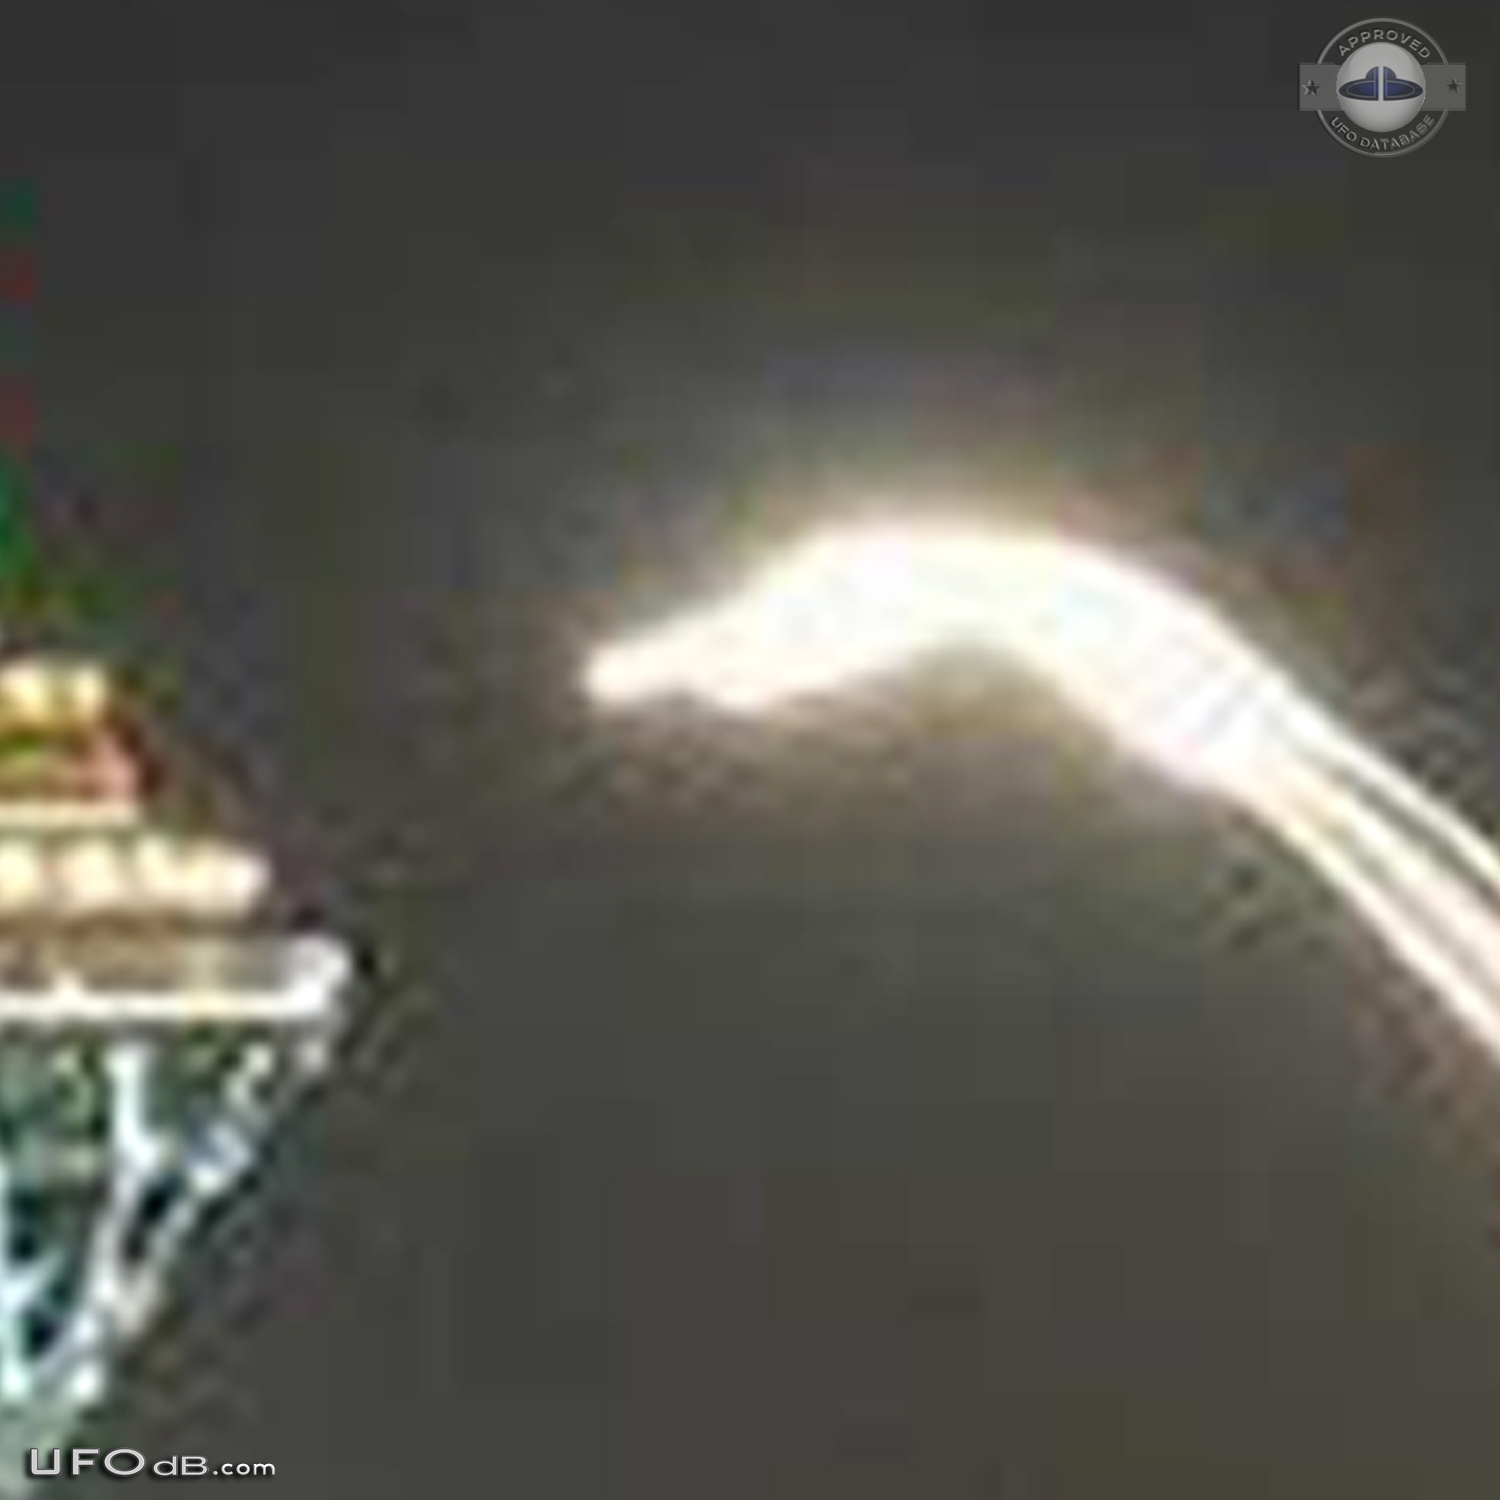 Glowing UFO with long trail near Milad Tower, Tehran, Iran 2012 UFO Picture #437-6